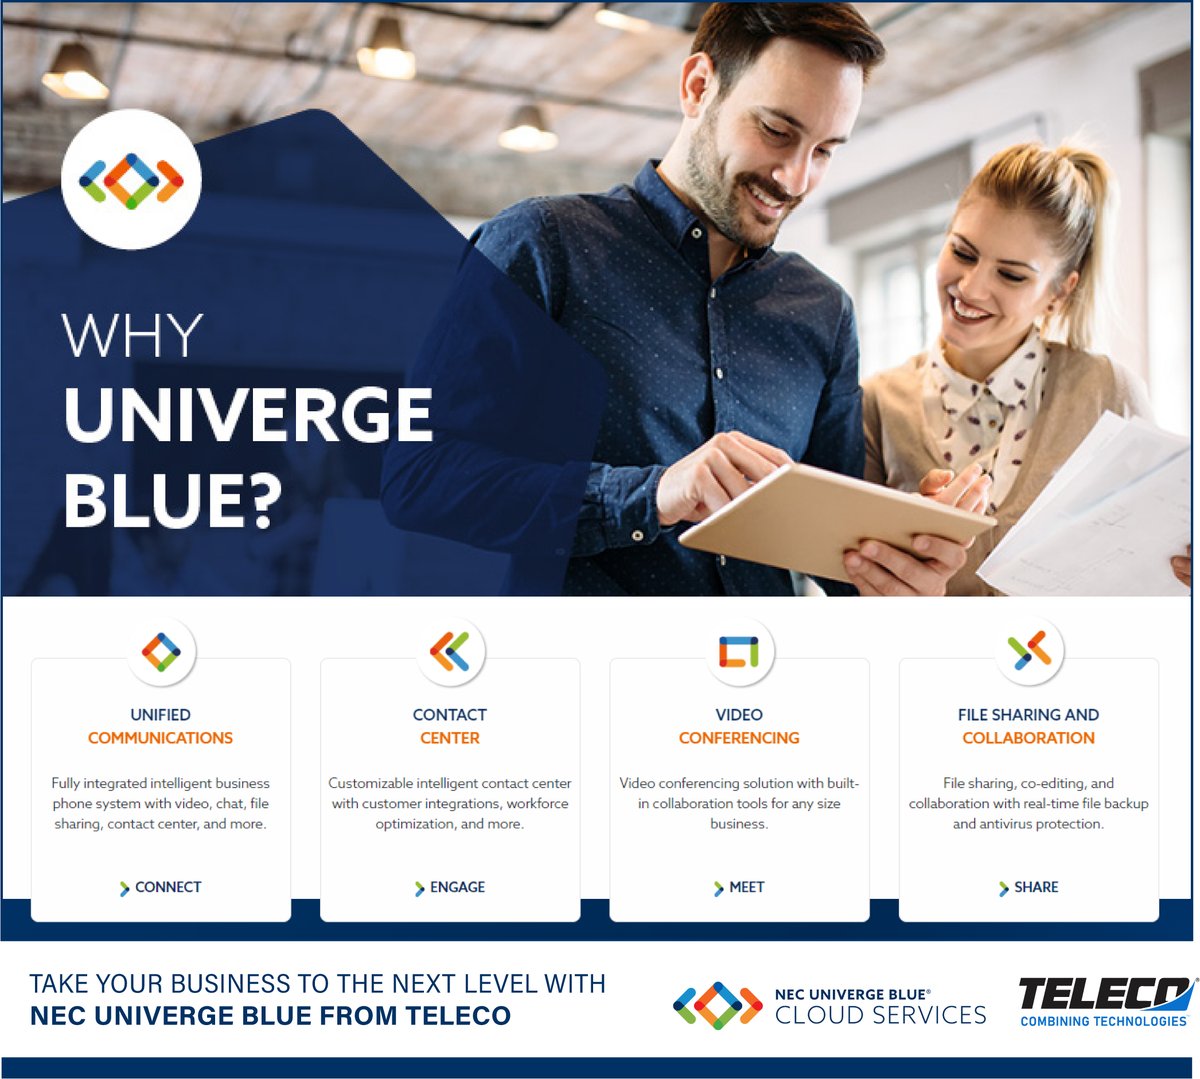 Contact @TELECOinc today to see how UNIVERGE BLUE can help take your business to the next level! #univergeblue #nec #cloudservices #UCaaS #businesscommunications #cloudcommunications #businesssolutions #businesstechnology #teleco #yeahthatgreenville #southflorida #usa